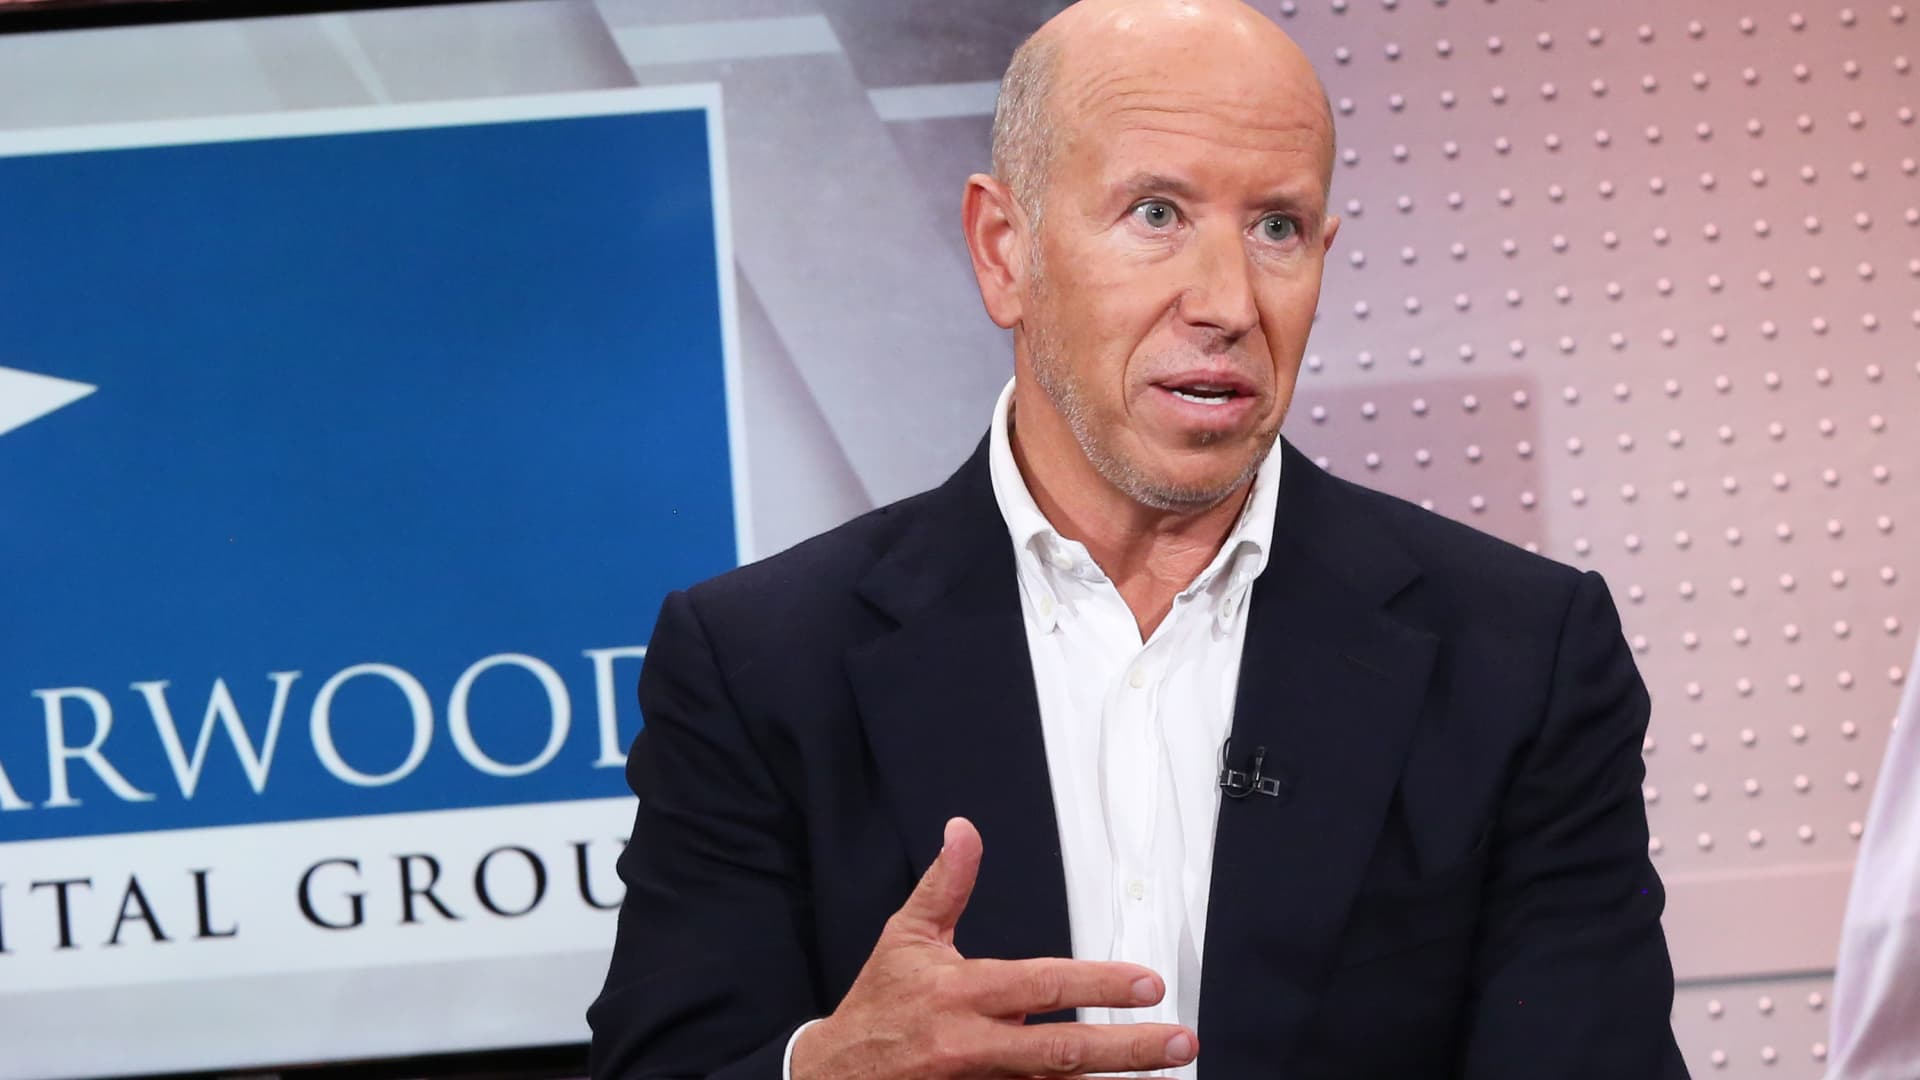 Barry Sternlicht says 'unbelievable calamities' ahead if the Fed keeps hiking